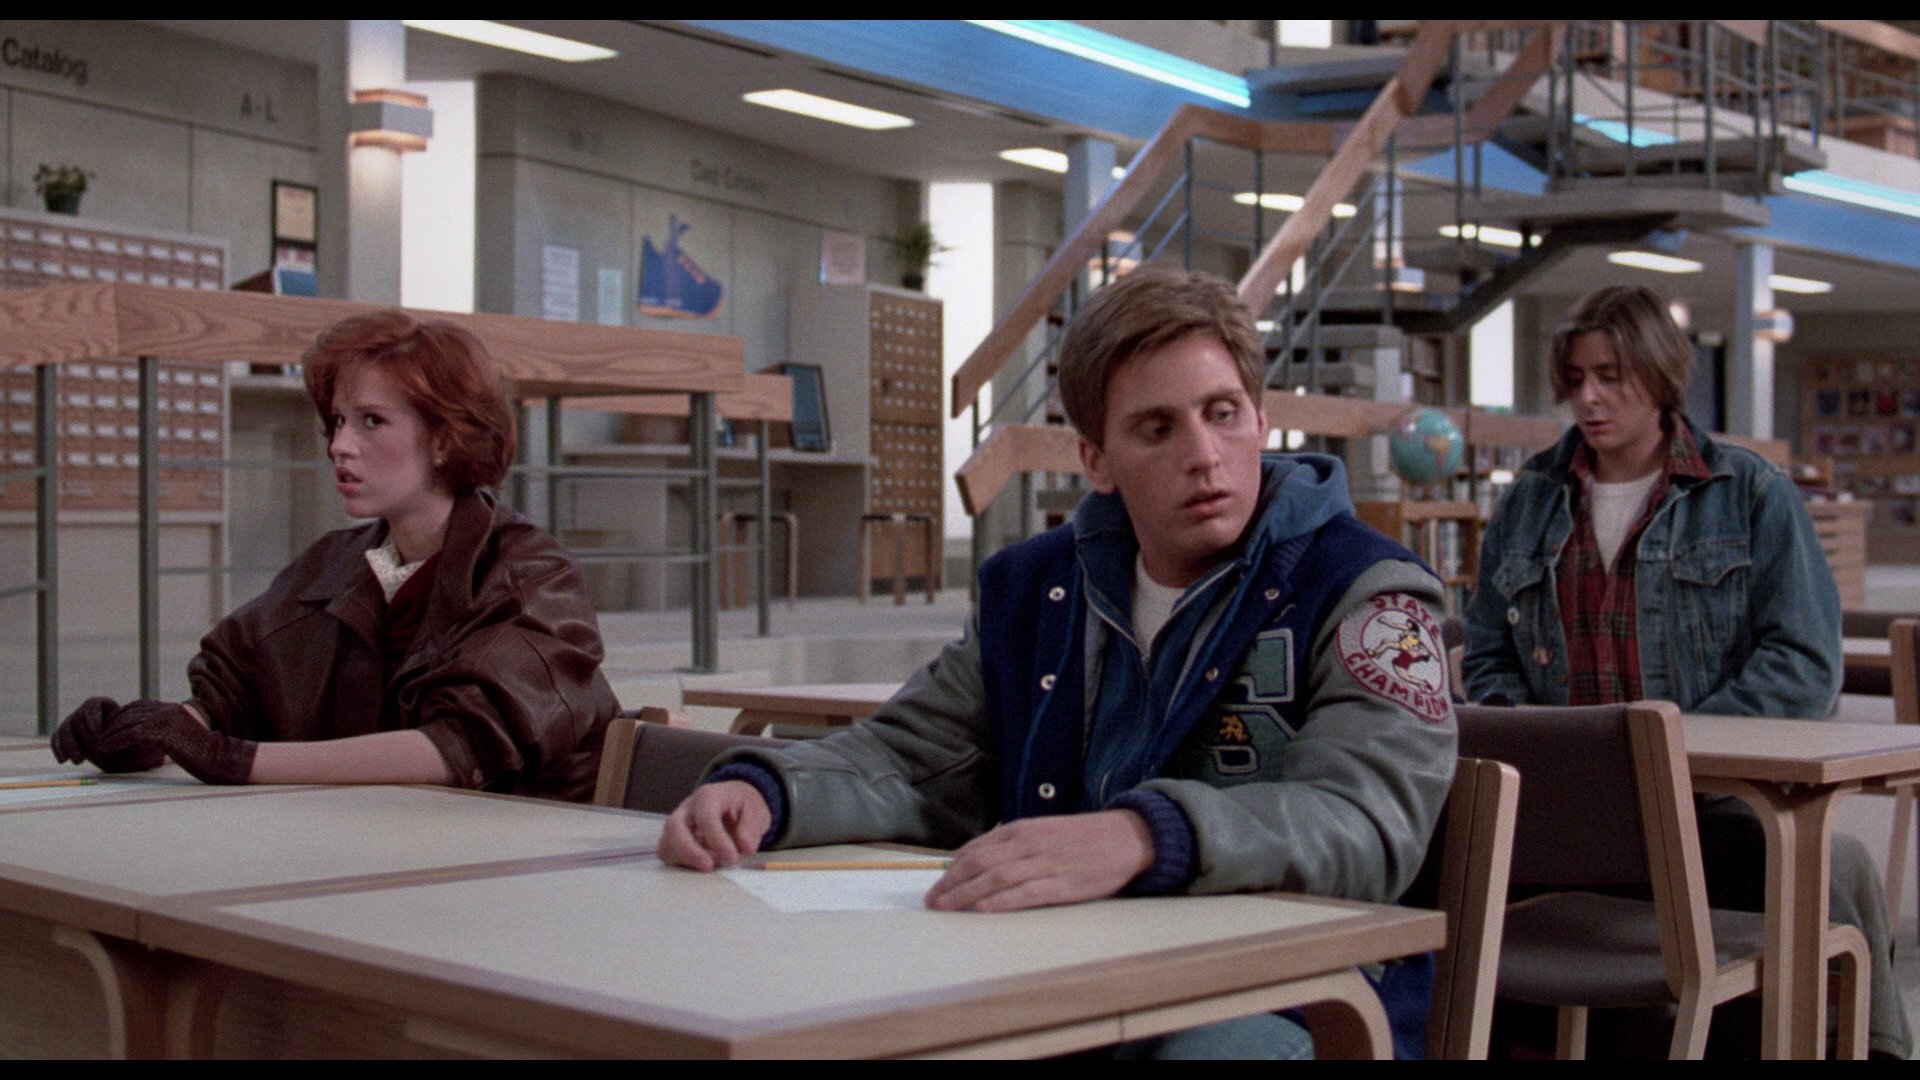 Image for The Breakfast Club - 30th Anniversary Edition. 